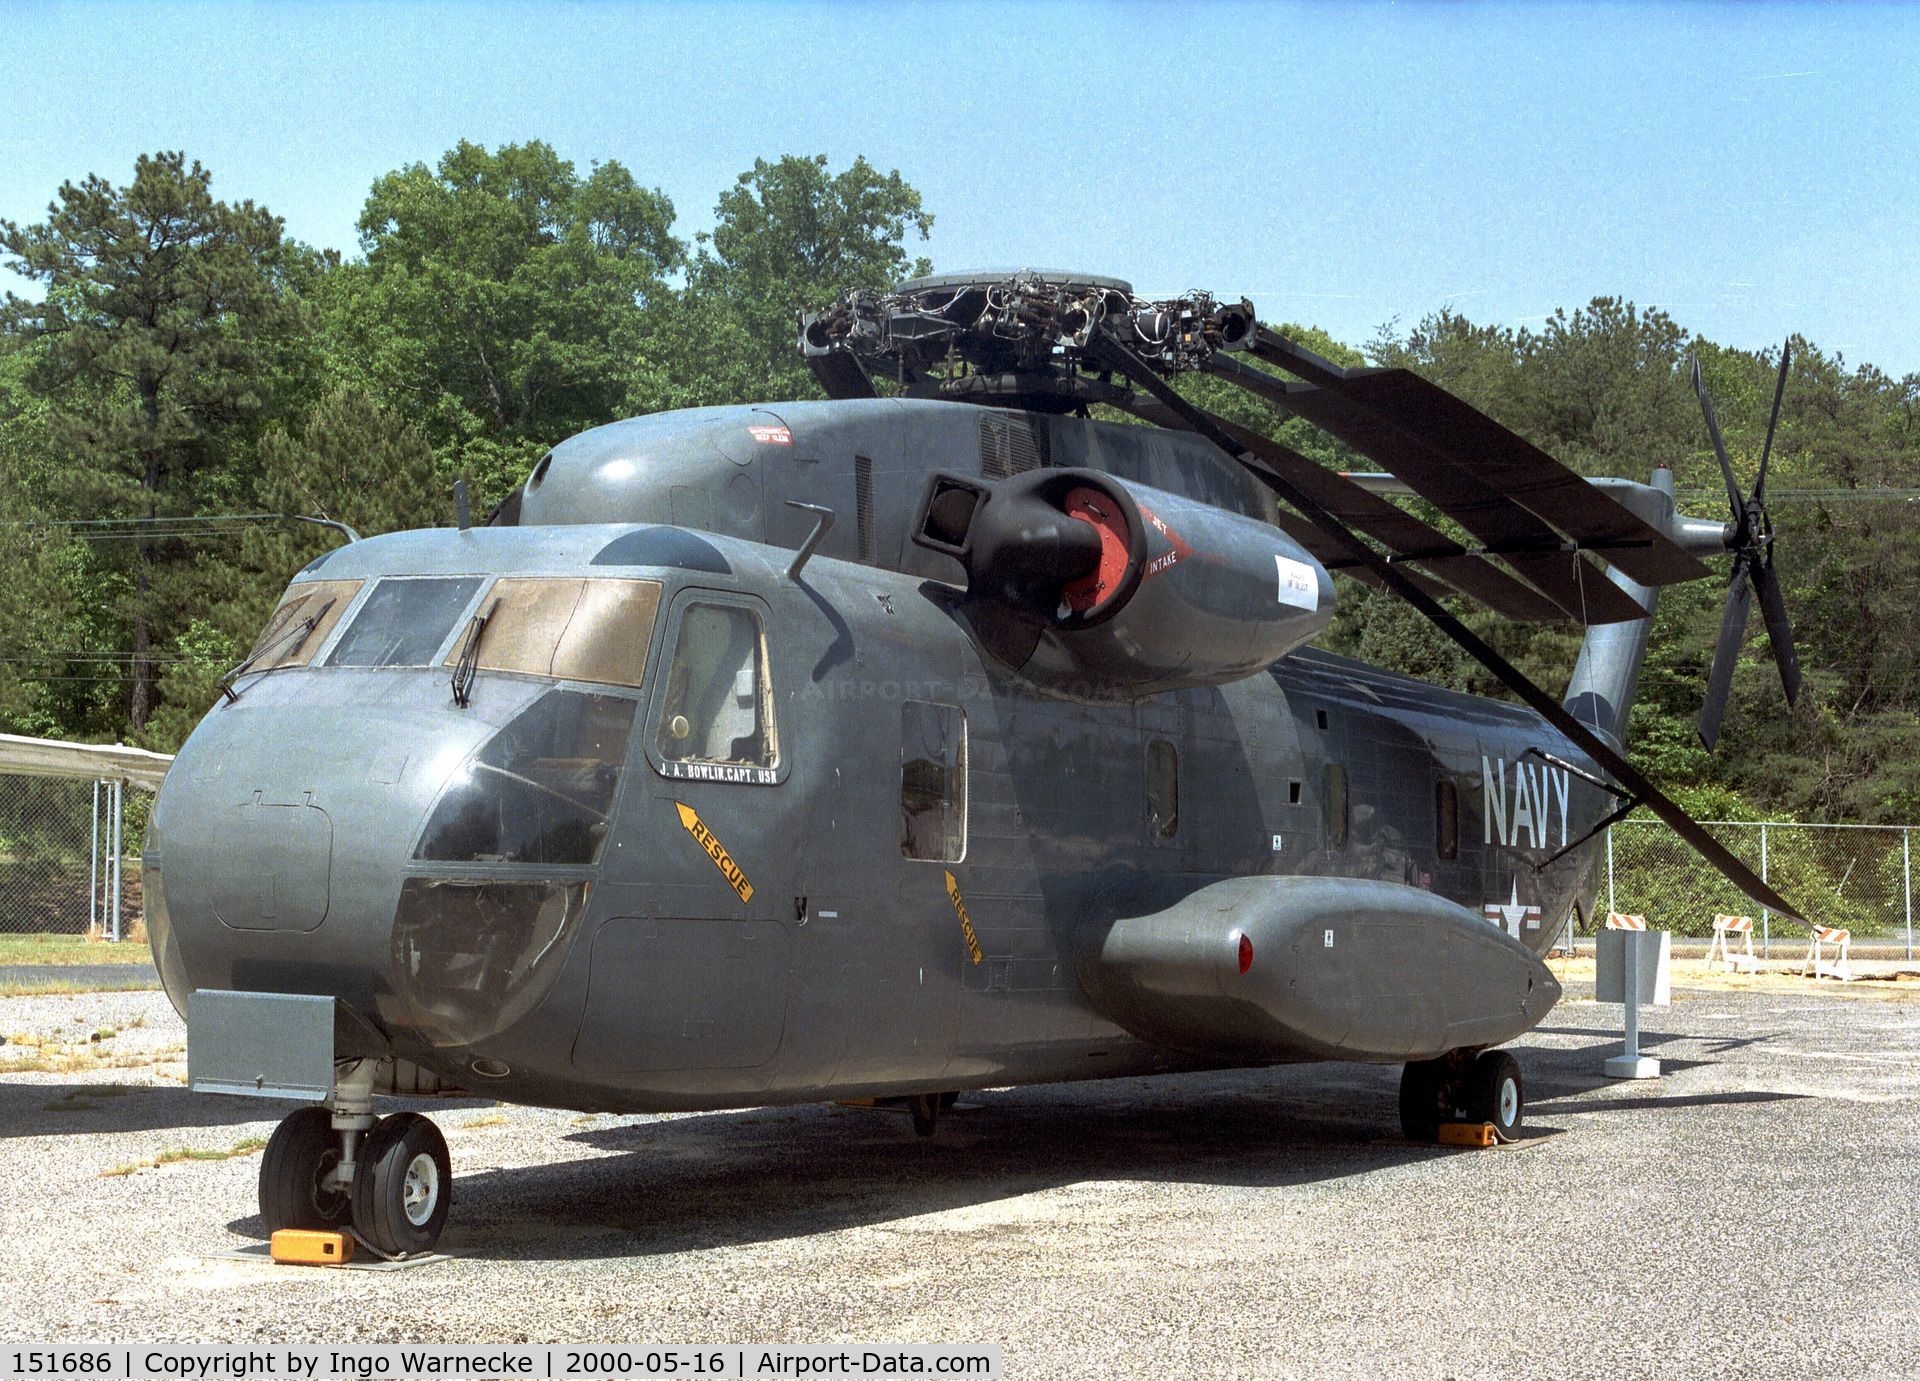 151686, Sikorsky CH-53A Super Stallion C/N 65-003, Sikorsky CH-53A Sea Stallion at the Patuxent River Naval Air Museum